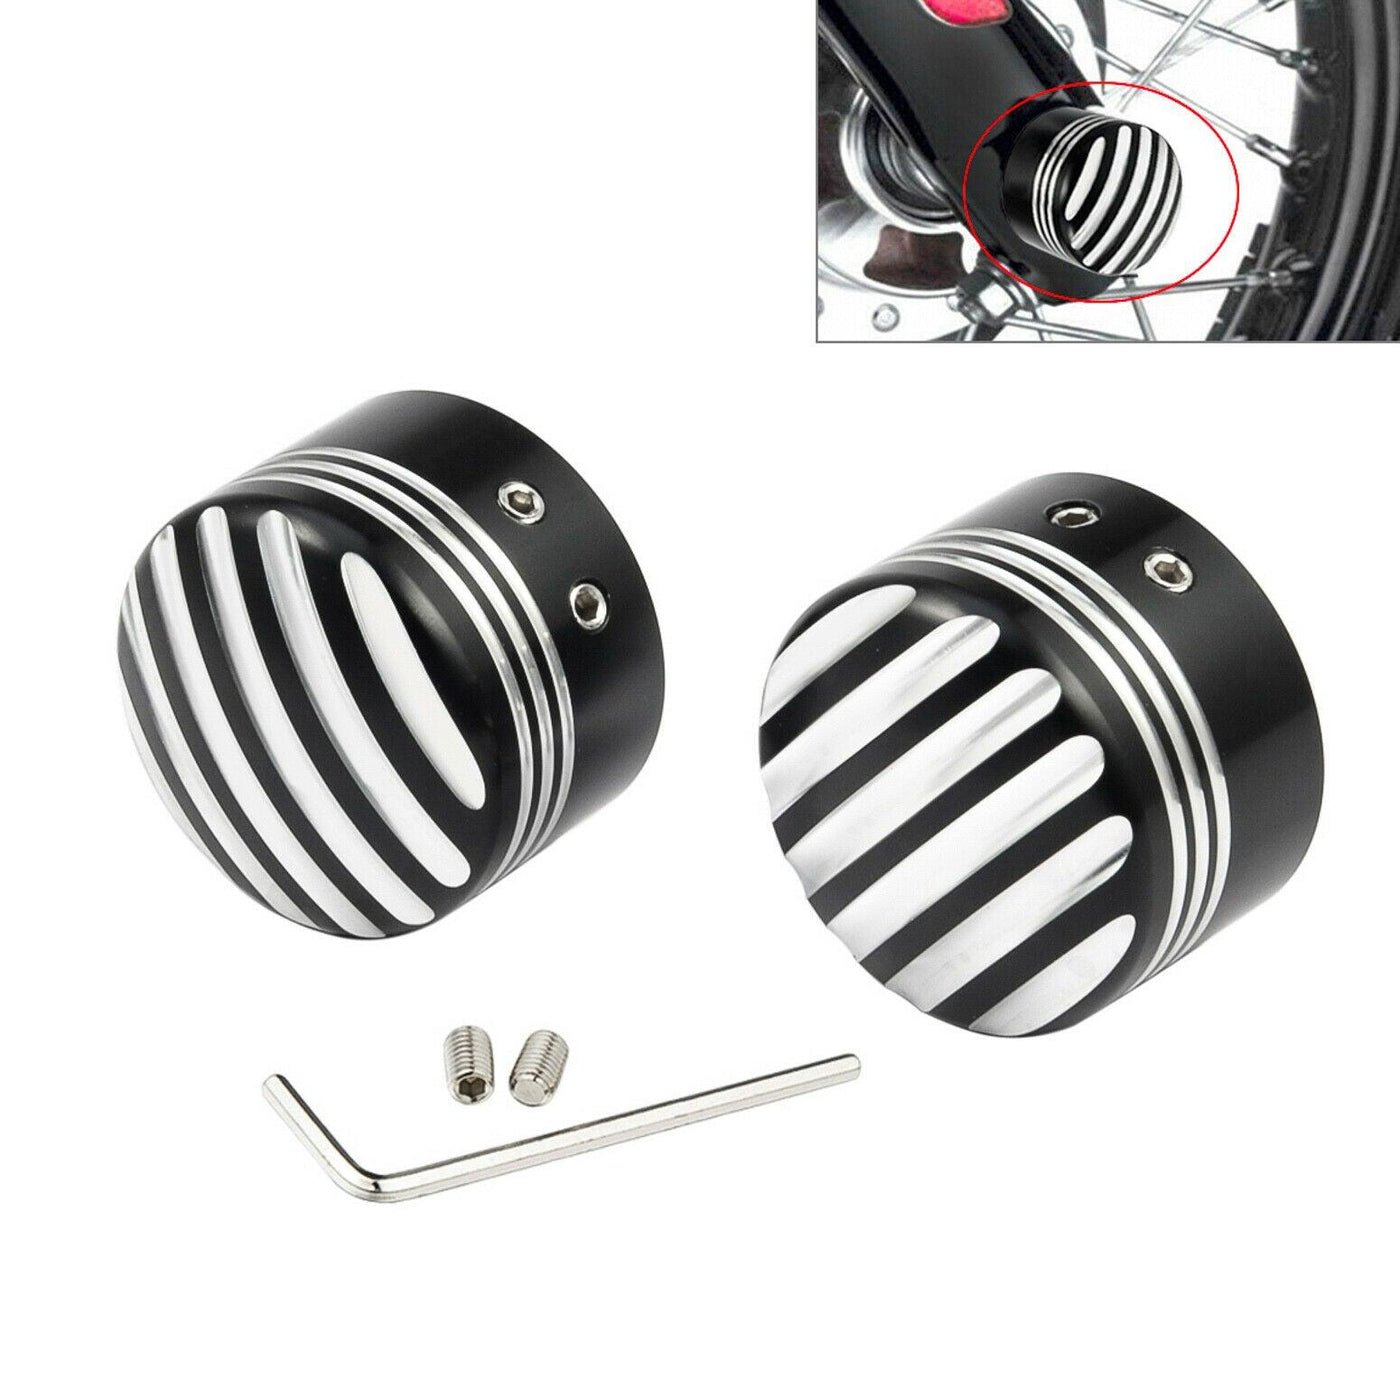 Black Front Axle Cap Nut Cover Fit For Harley Sportster XL883 Road Electra Glide - Moto Life Products